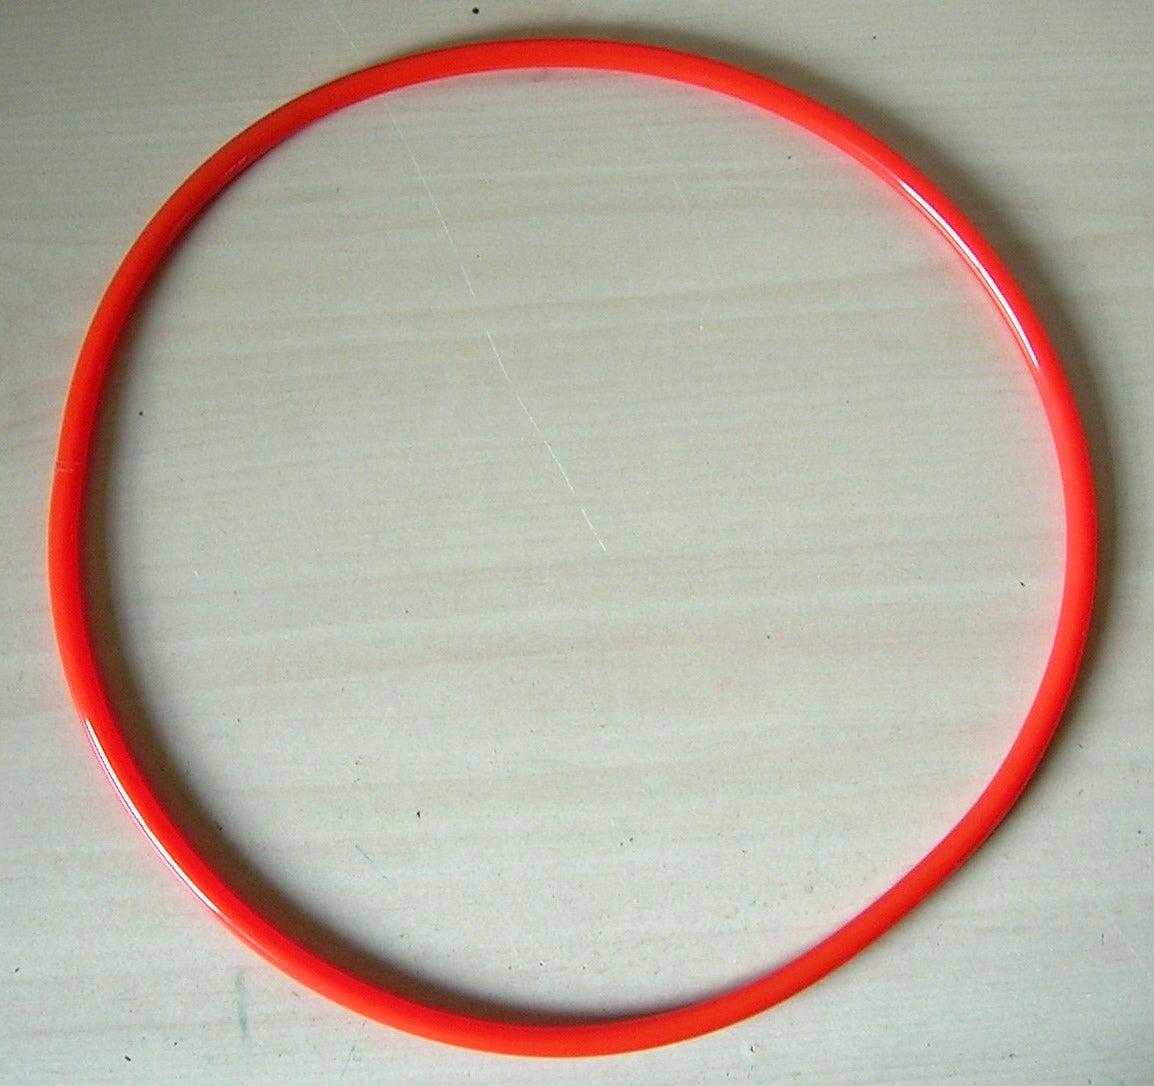 1/4" ROUND DRIVE BELT FOR VALUECRAFT Model 8170 BAND SAW